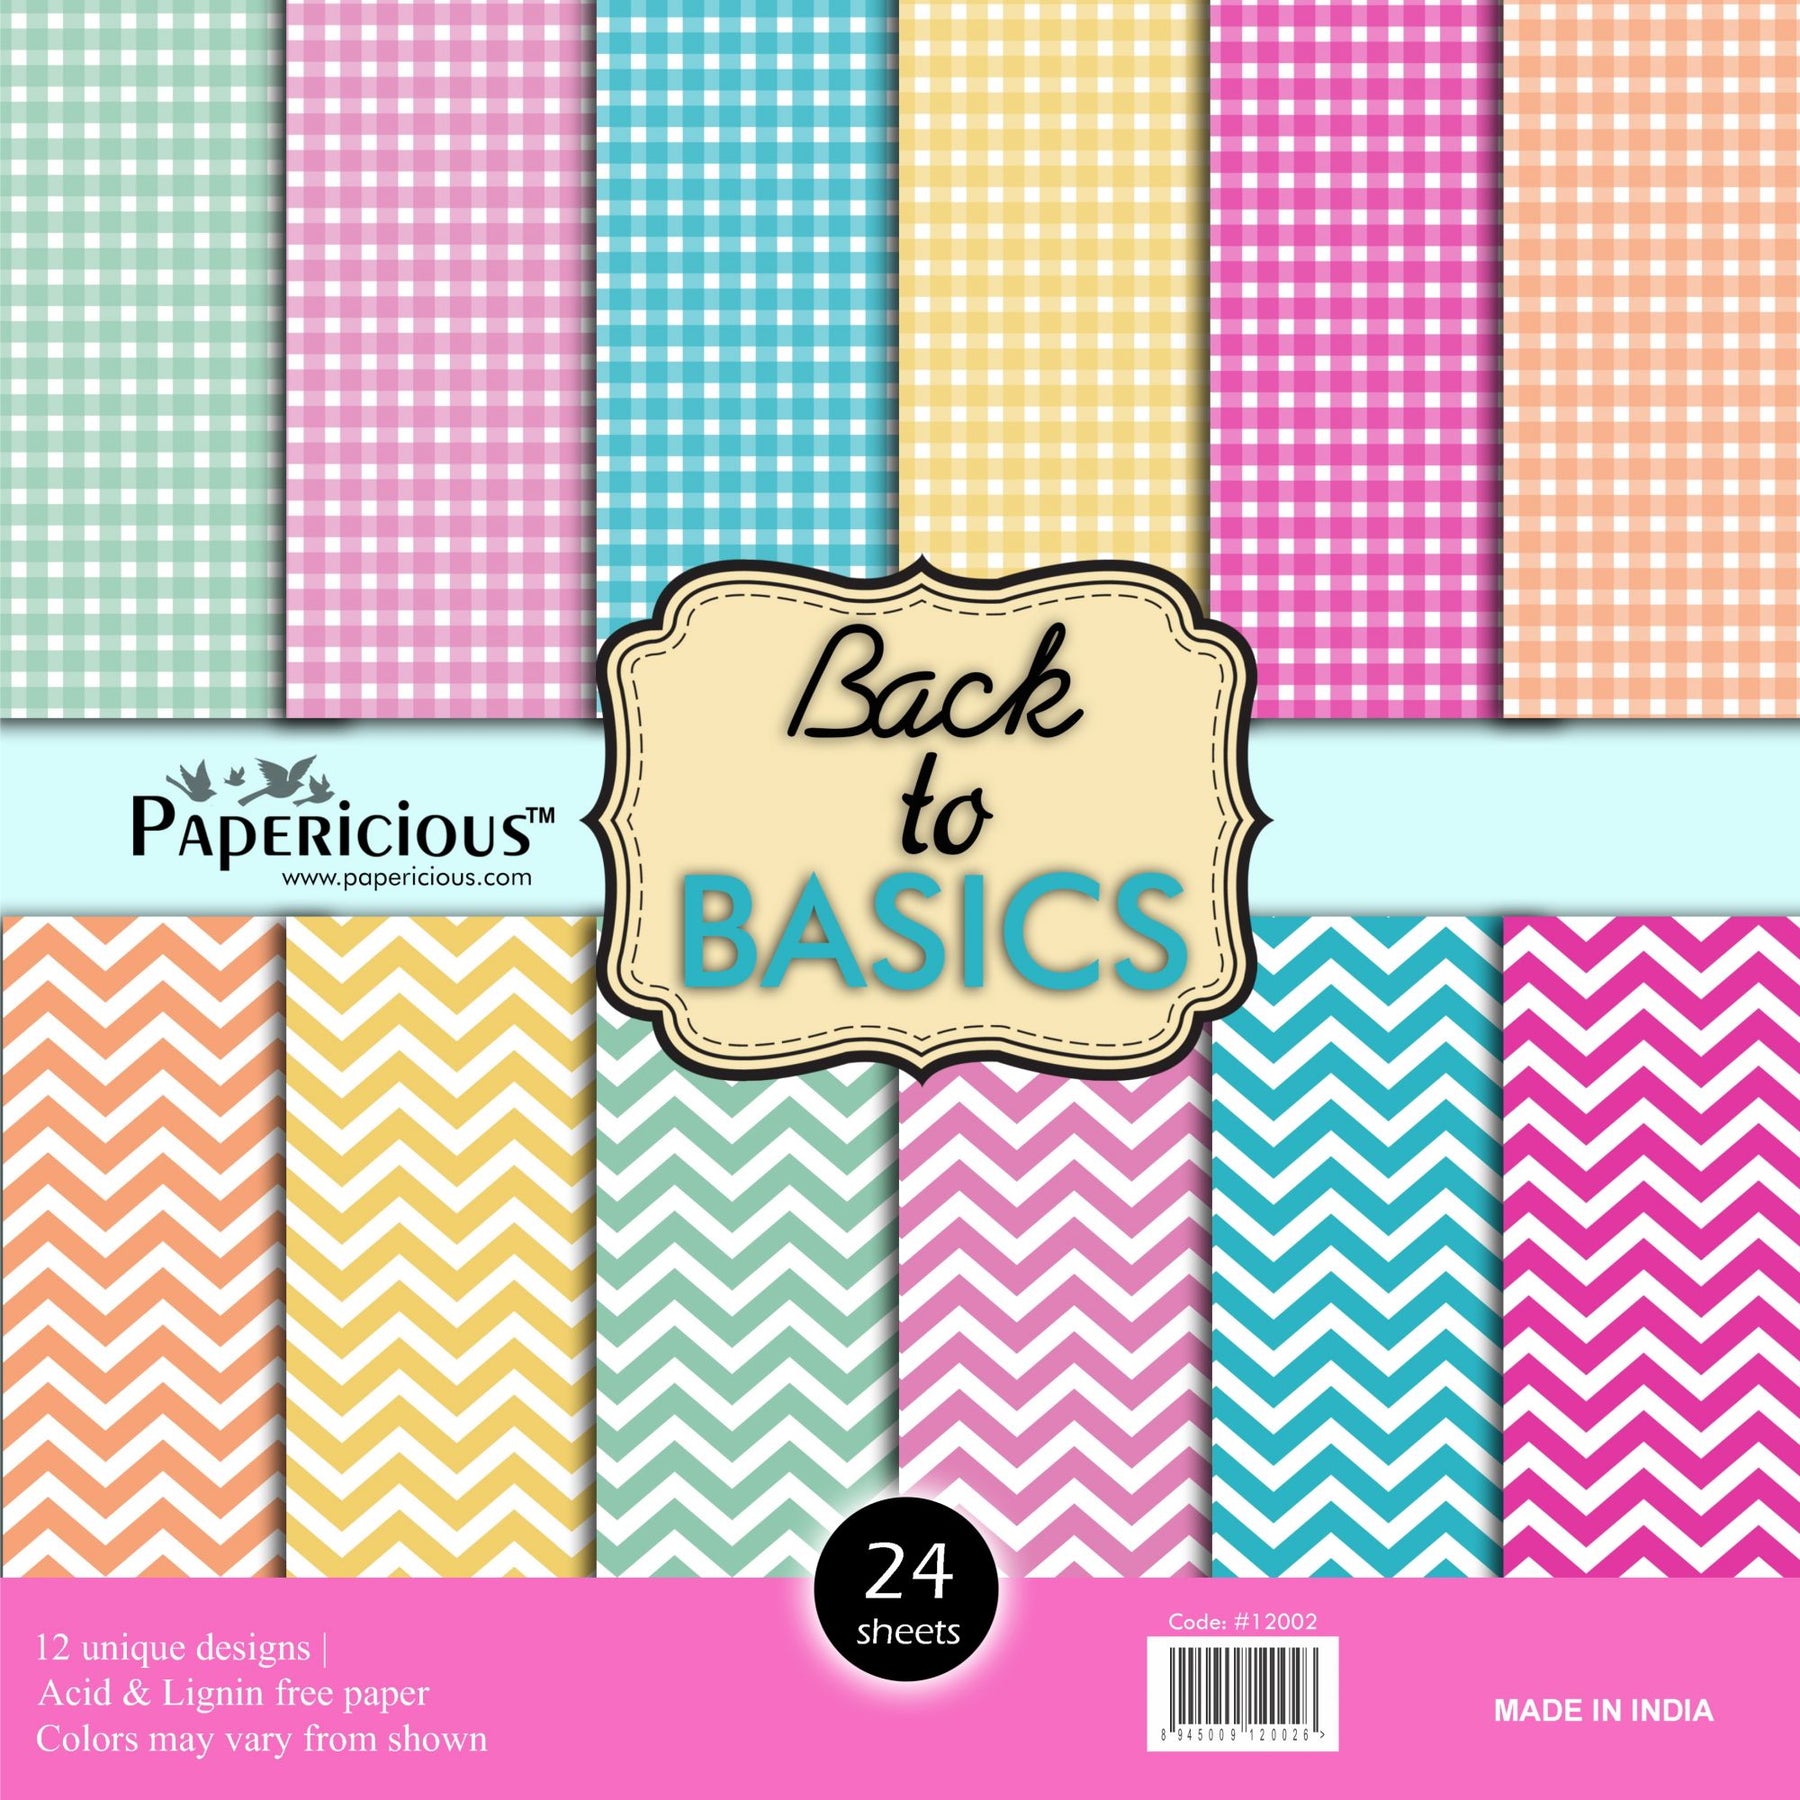 PAPERICIOUS - Back to Basic -  Designer Pattern Printed Scrapbook Paper / 24 sheets